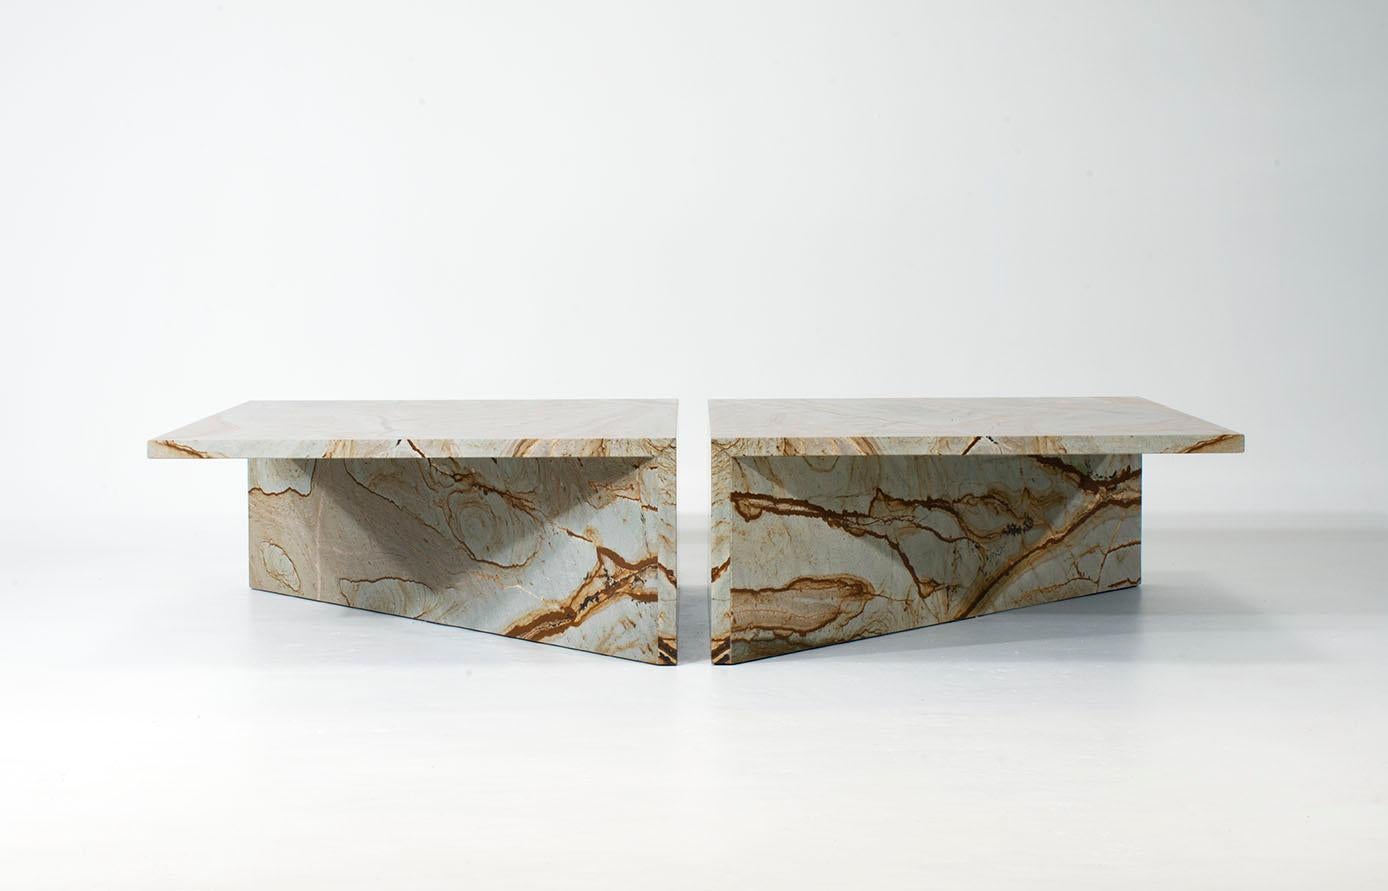 The visual impact of this table depends on how it is positioned as it can be perceived primarily as a large monolithic block or as an extreme cantilever that seems to defy possibility. When combining two tables together there are various